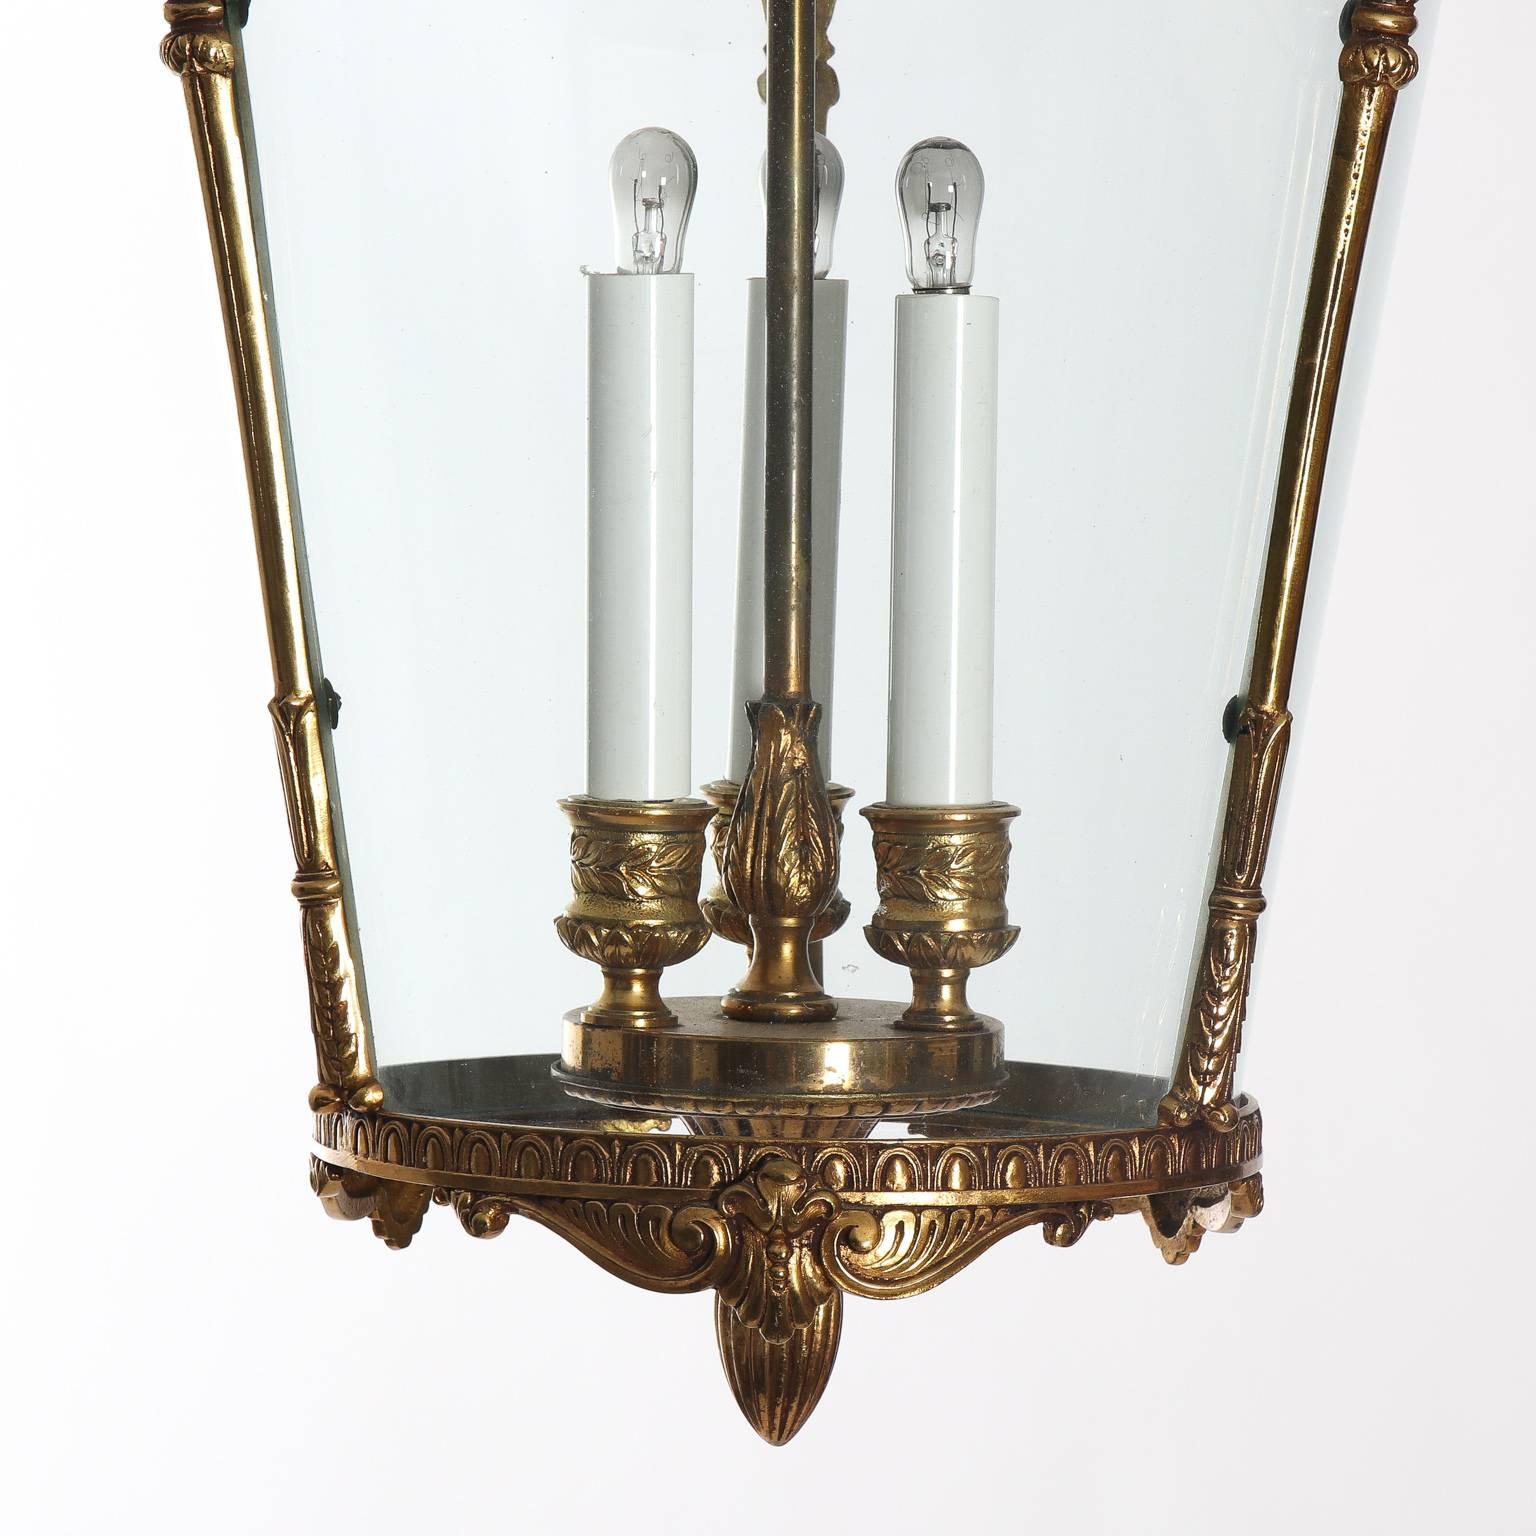 Early 20th century bronze three light lantern with curved glass panes.
 